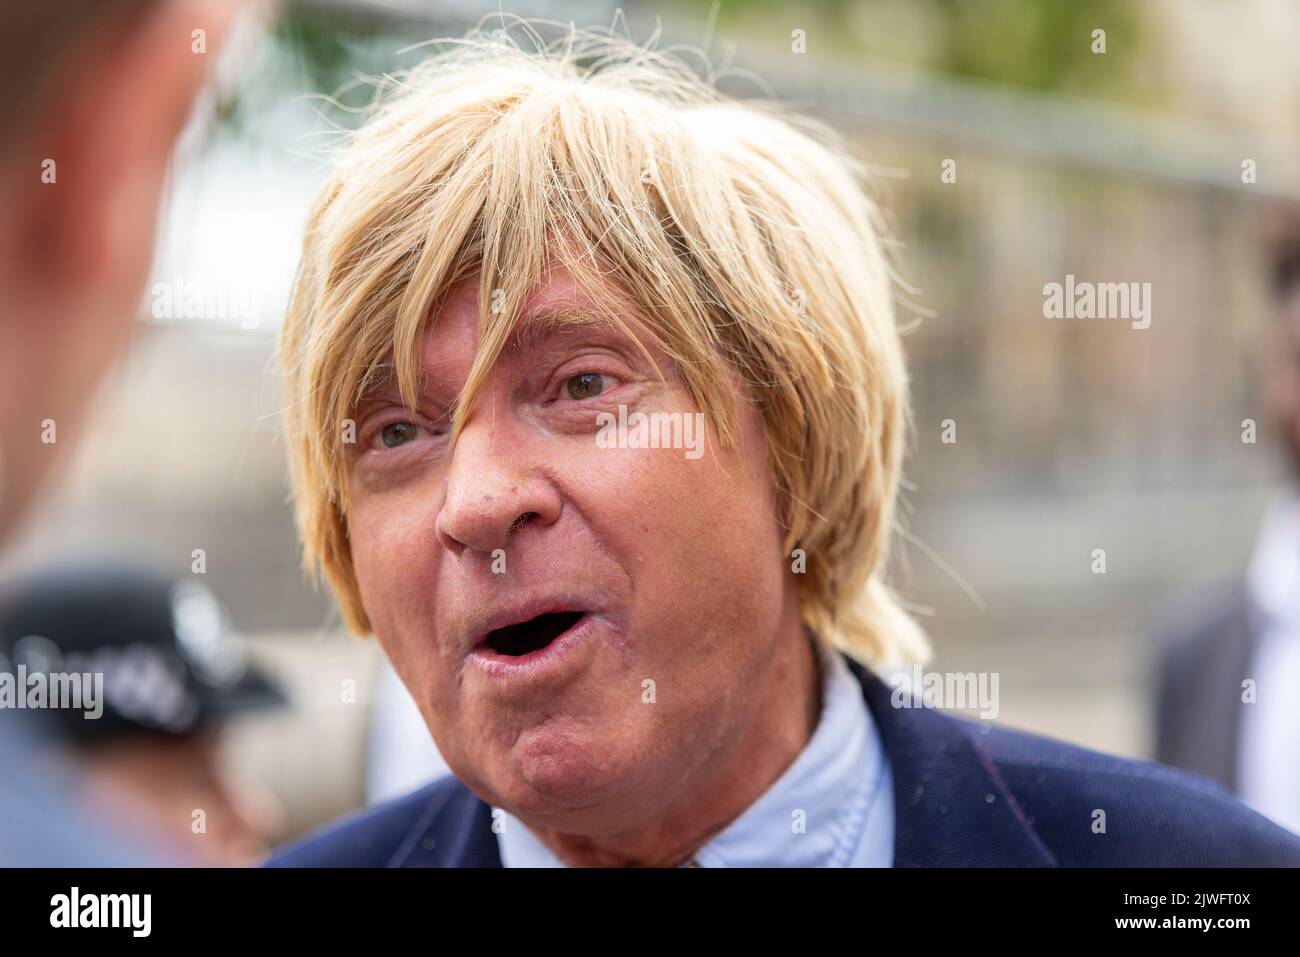 Michael Fabricant MP at the Queen Elizabeth II Centre for the Conservative party leadership announcement, London, UK. Stock Photo